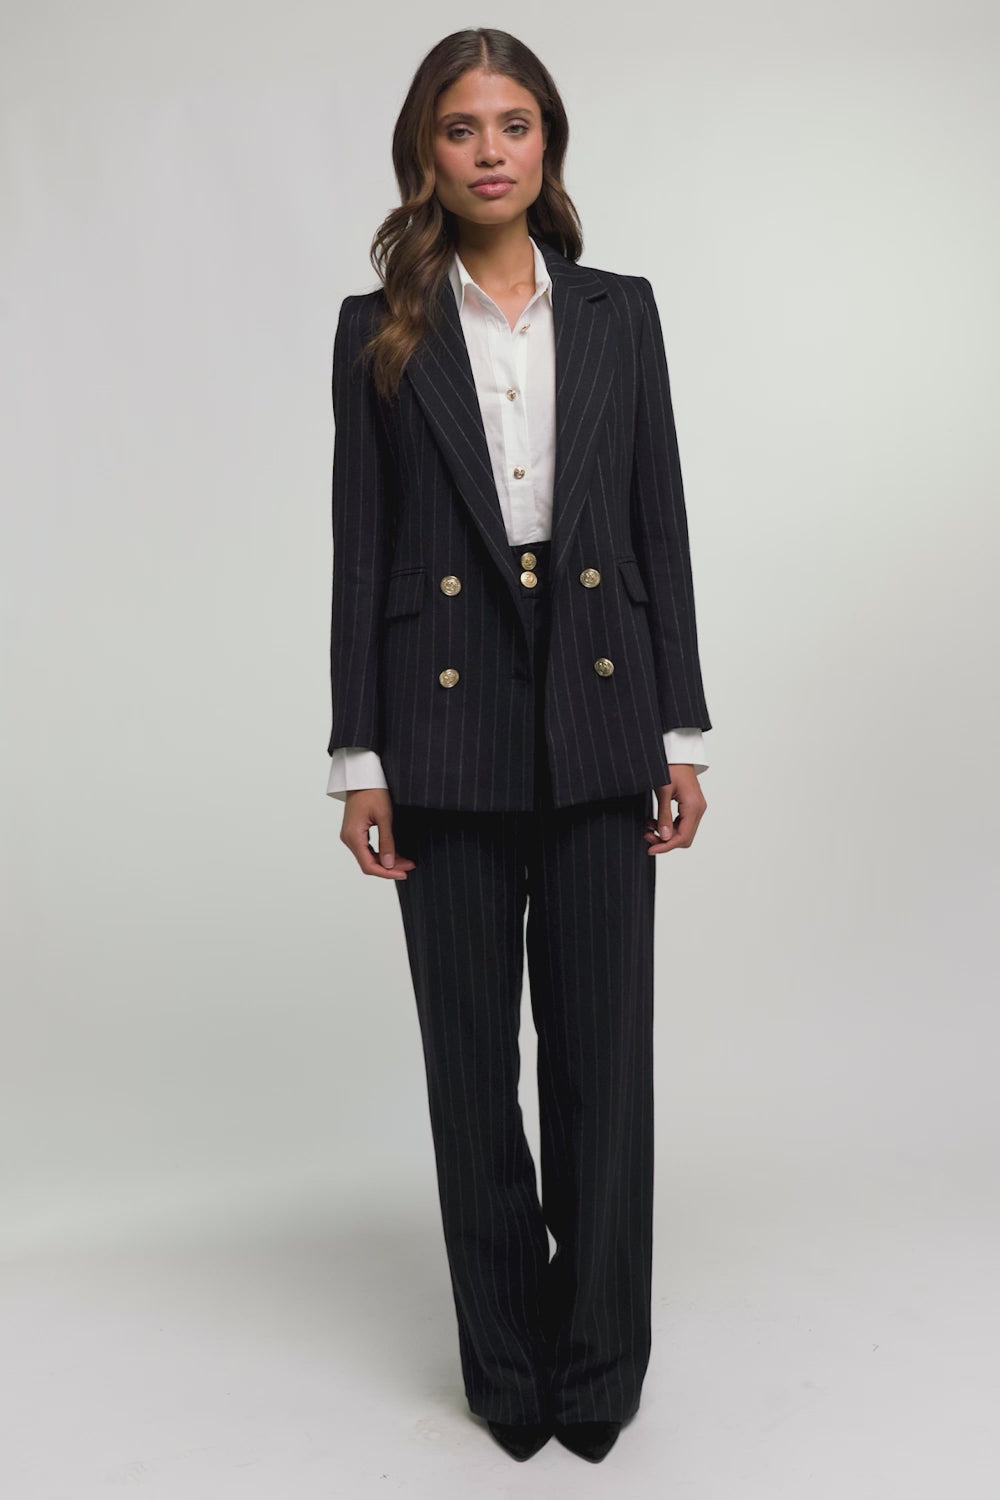 double breasted wool blazer in navy and cream chalk pinstripe with two hip pockets and gold button detials down front and on cuffs and handmade in the uk